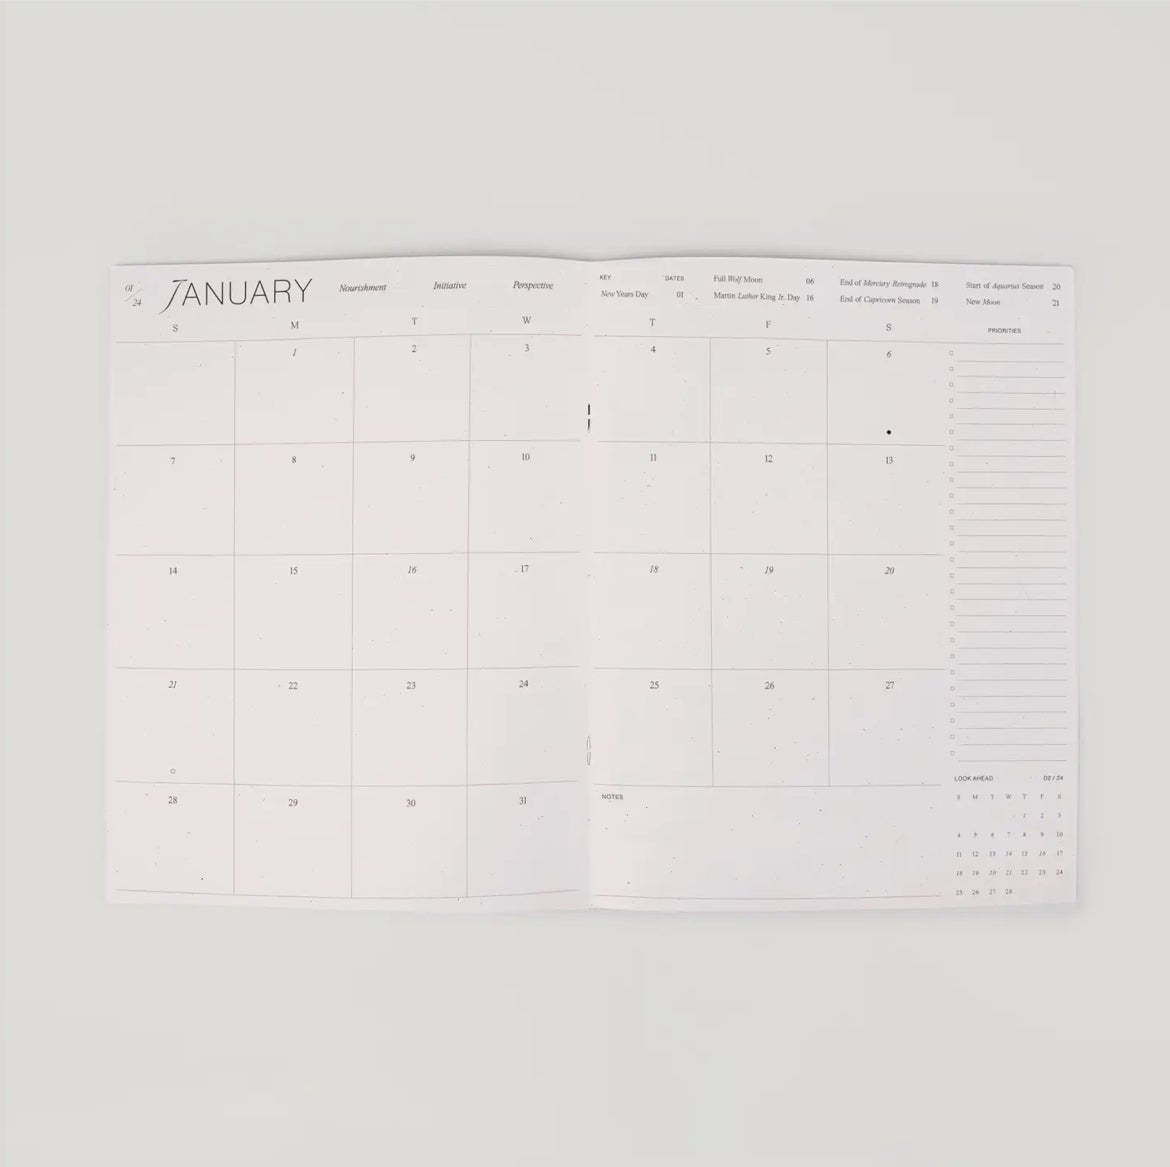 ‘2024 Intentional Planner’ - EcoLuxe Furnishings